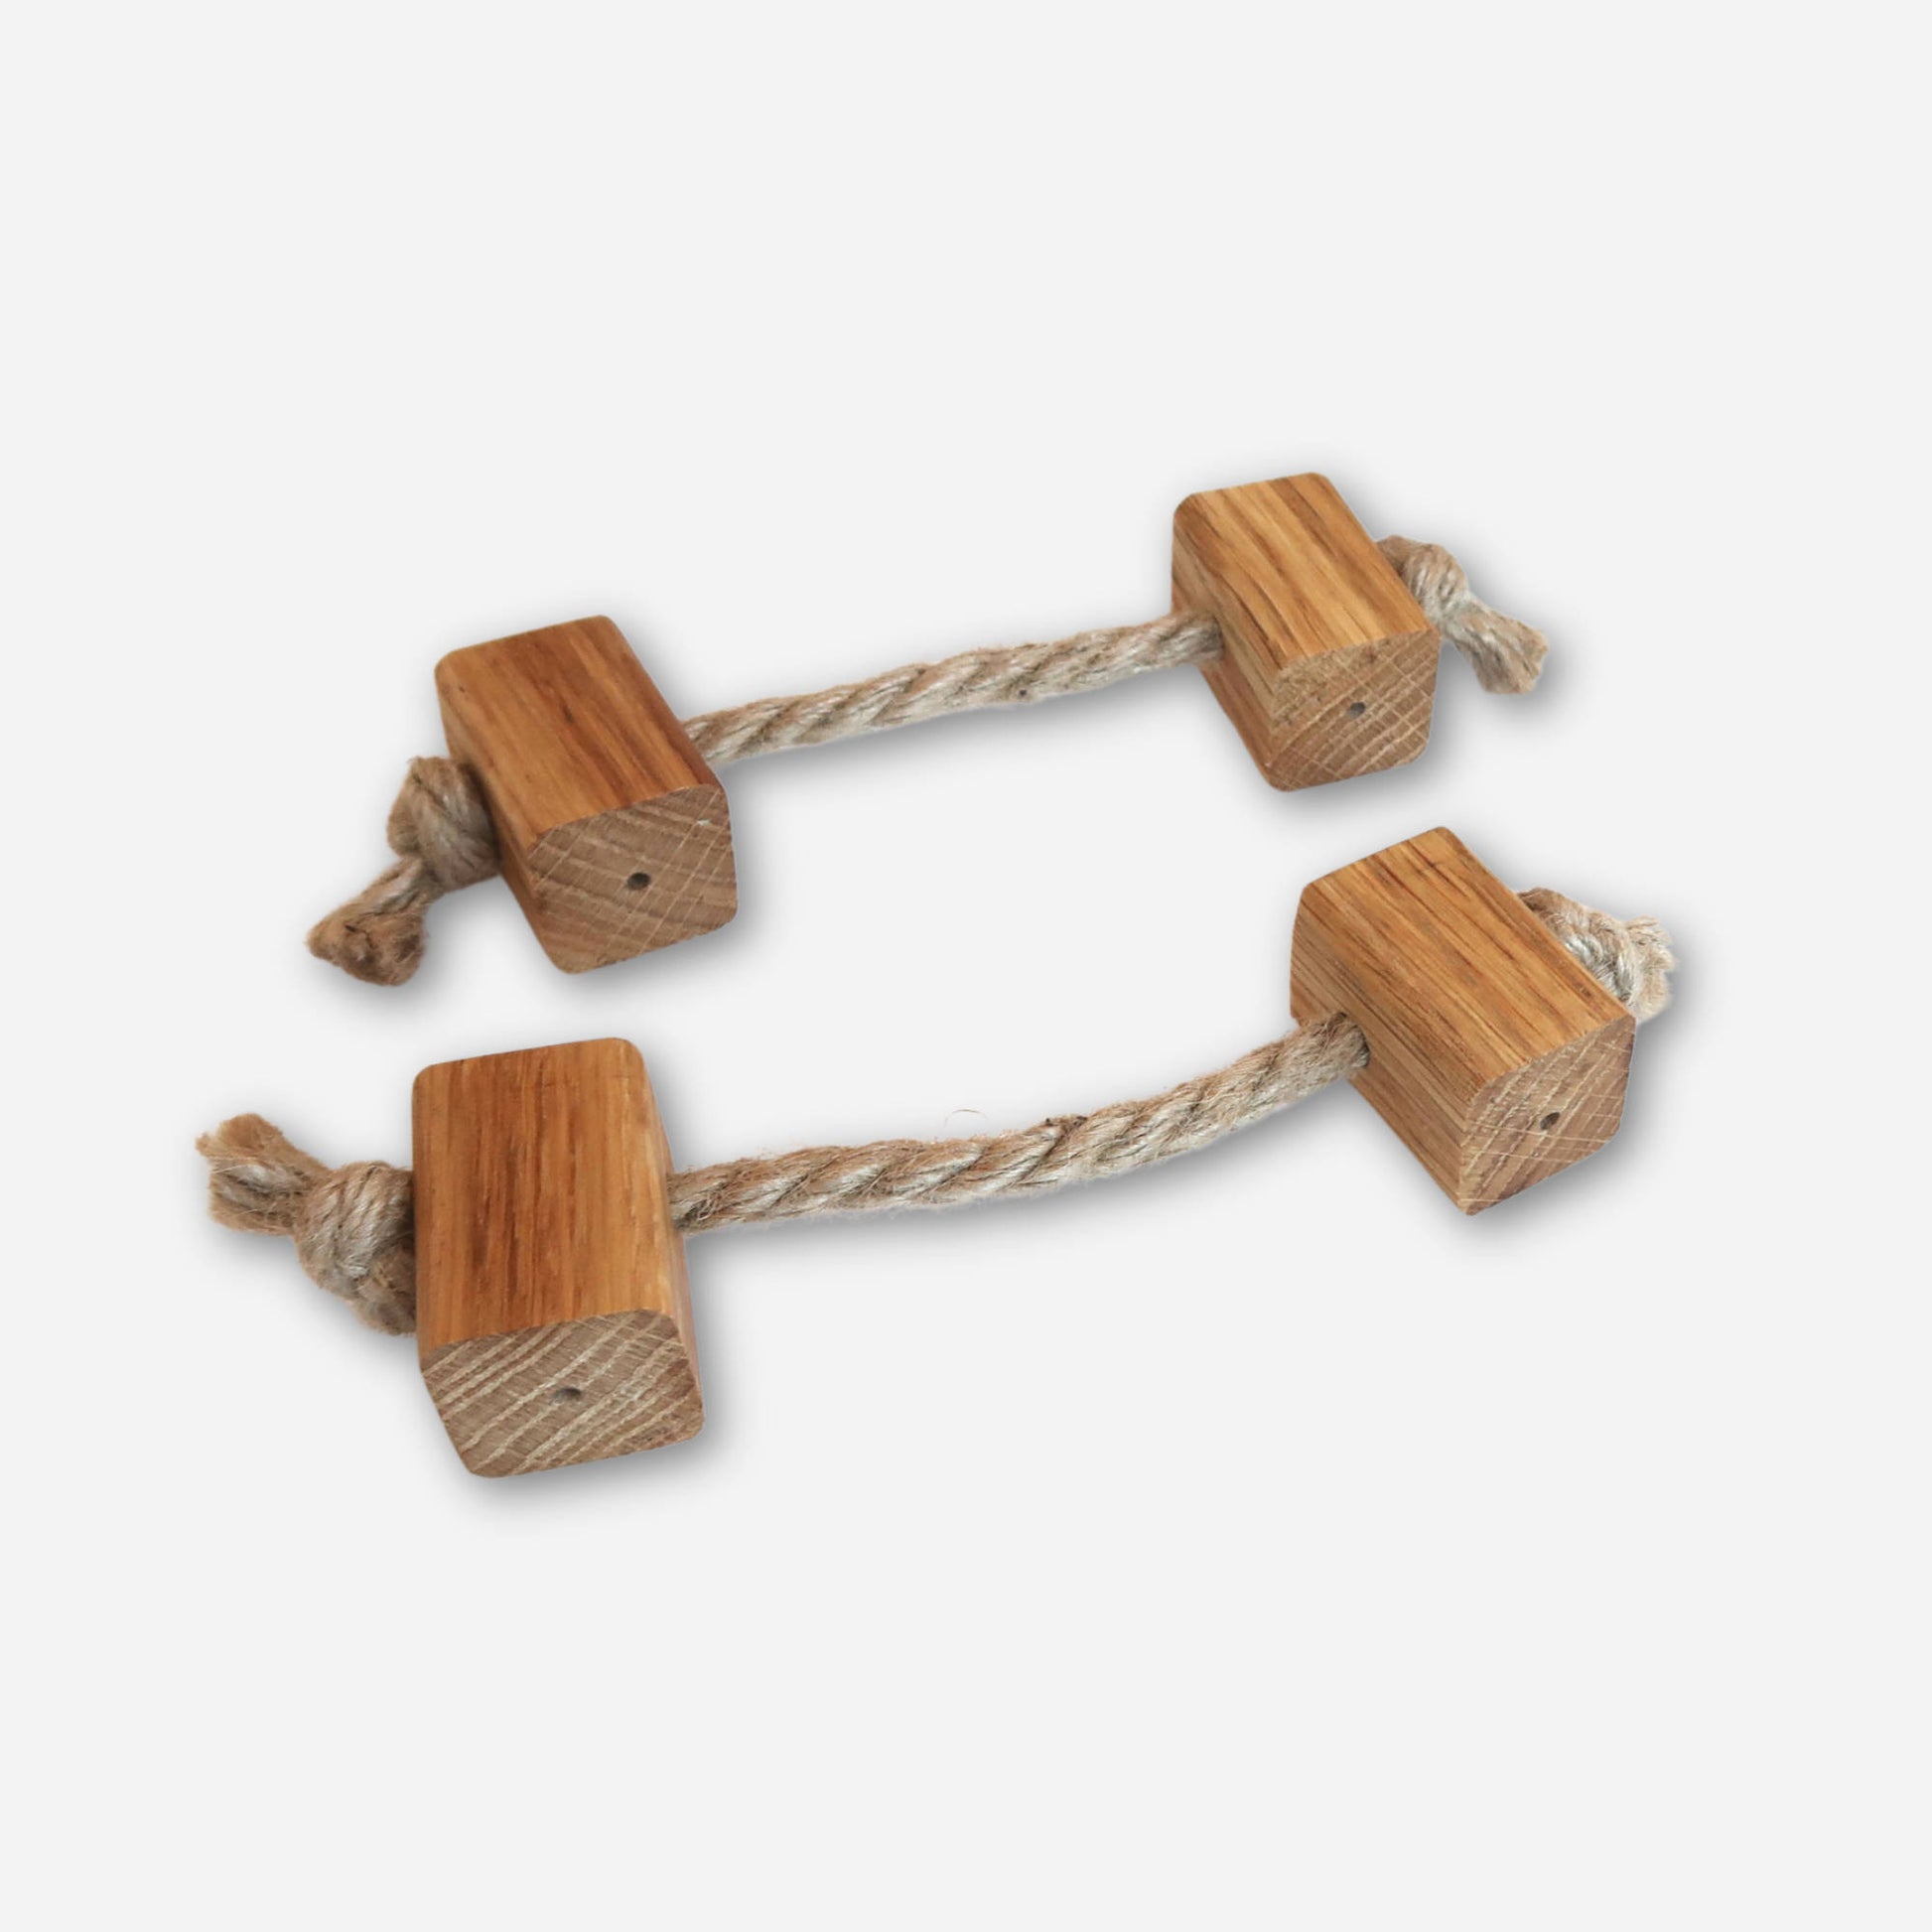 Beach-themed  drawer pulls made of rope and oak wood, with square wooden ends knotted on each side.